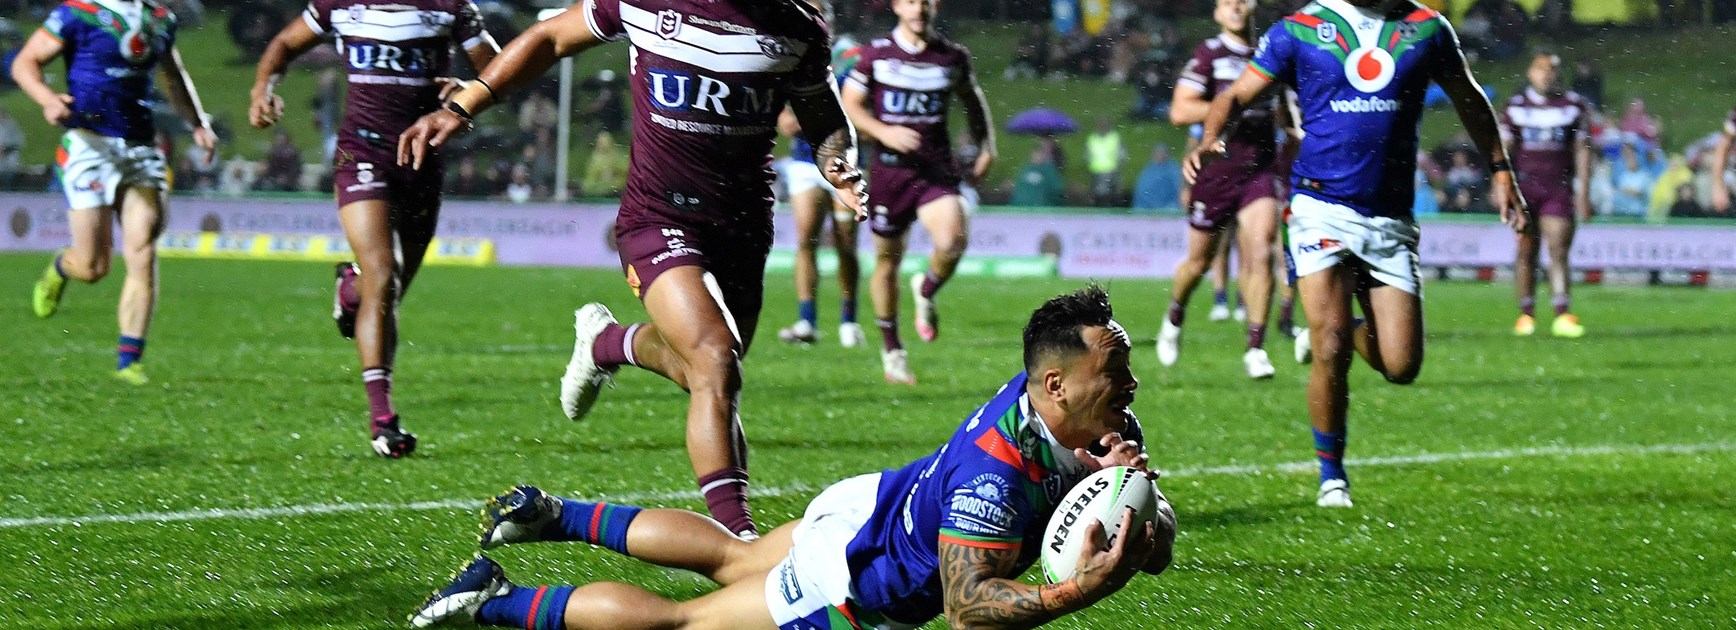 Try of the Week: Round 13 - 'Foxx' on the run to top spot